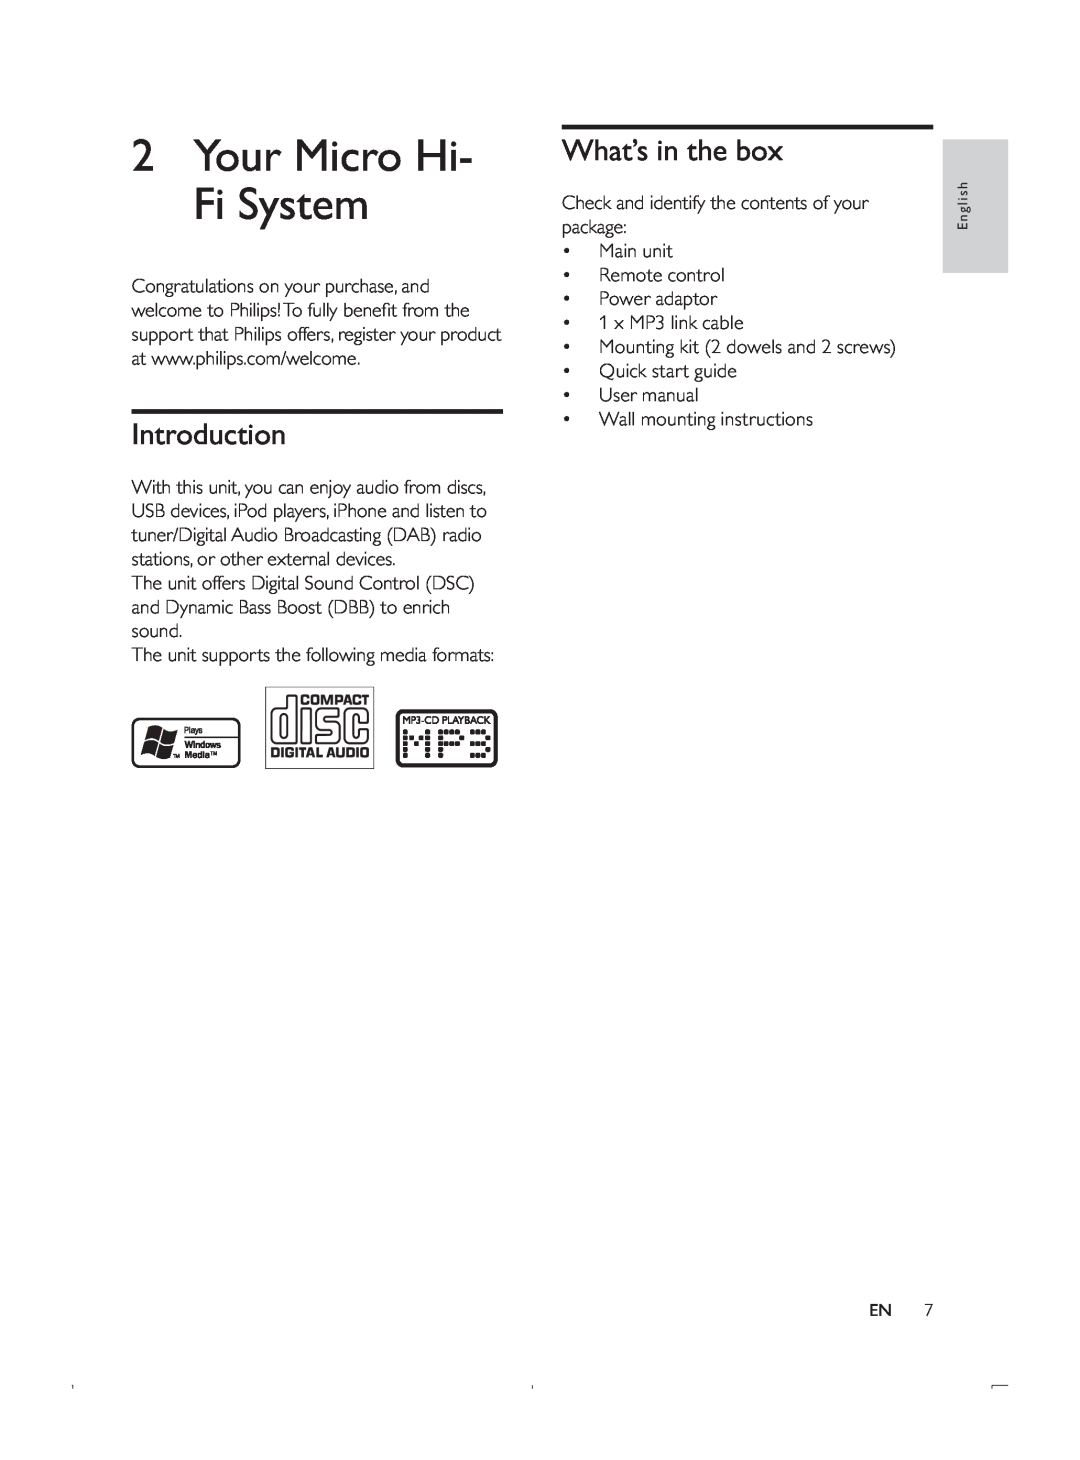 Philips DCB293 user manual 2Your Micro Hi- Fi System, Introduction, What’s in the box 